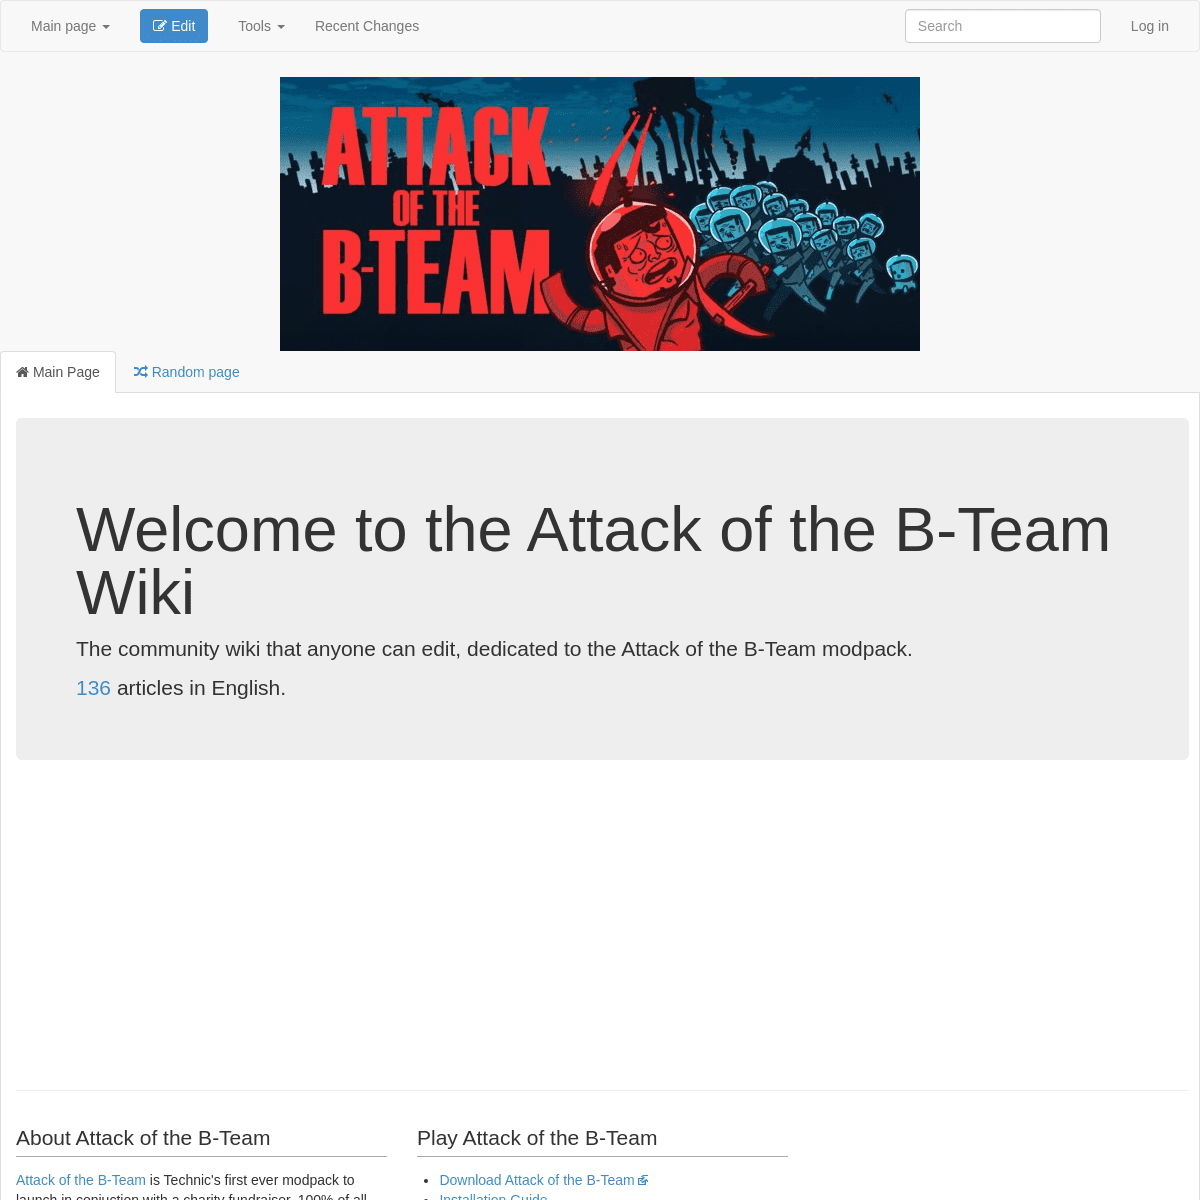 A complete backup of attackofthebteamwiki.com